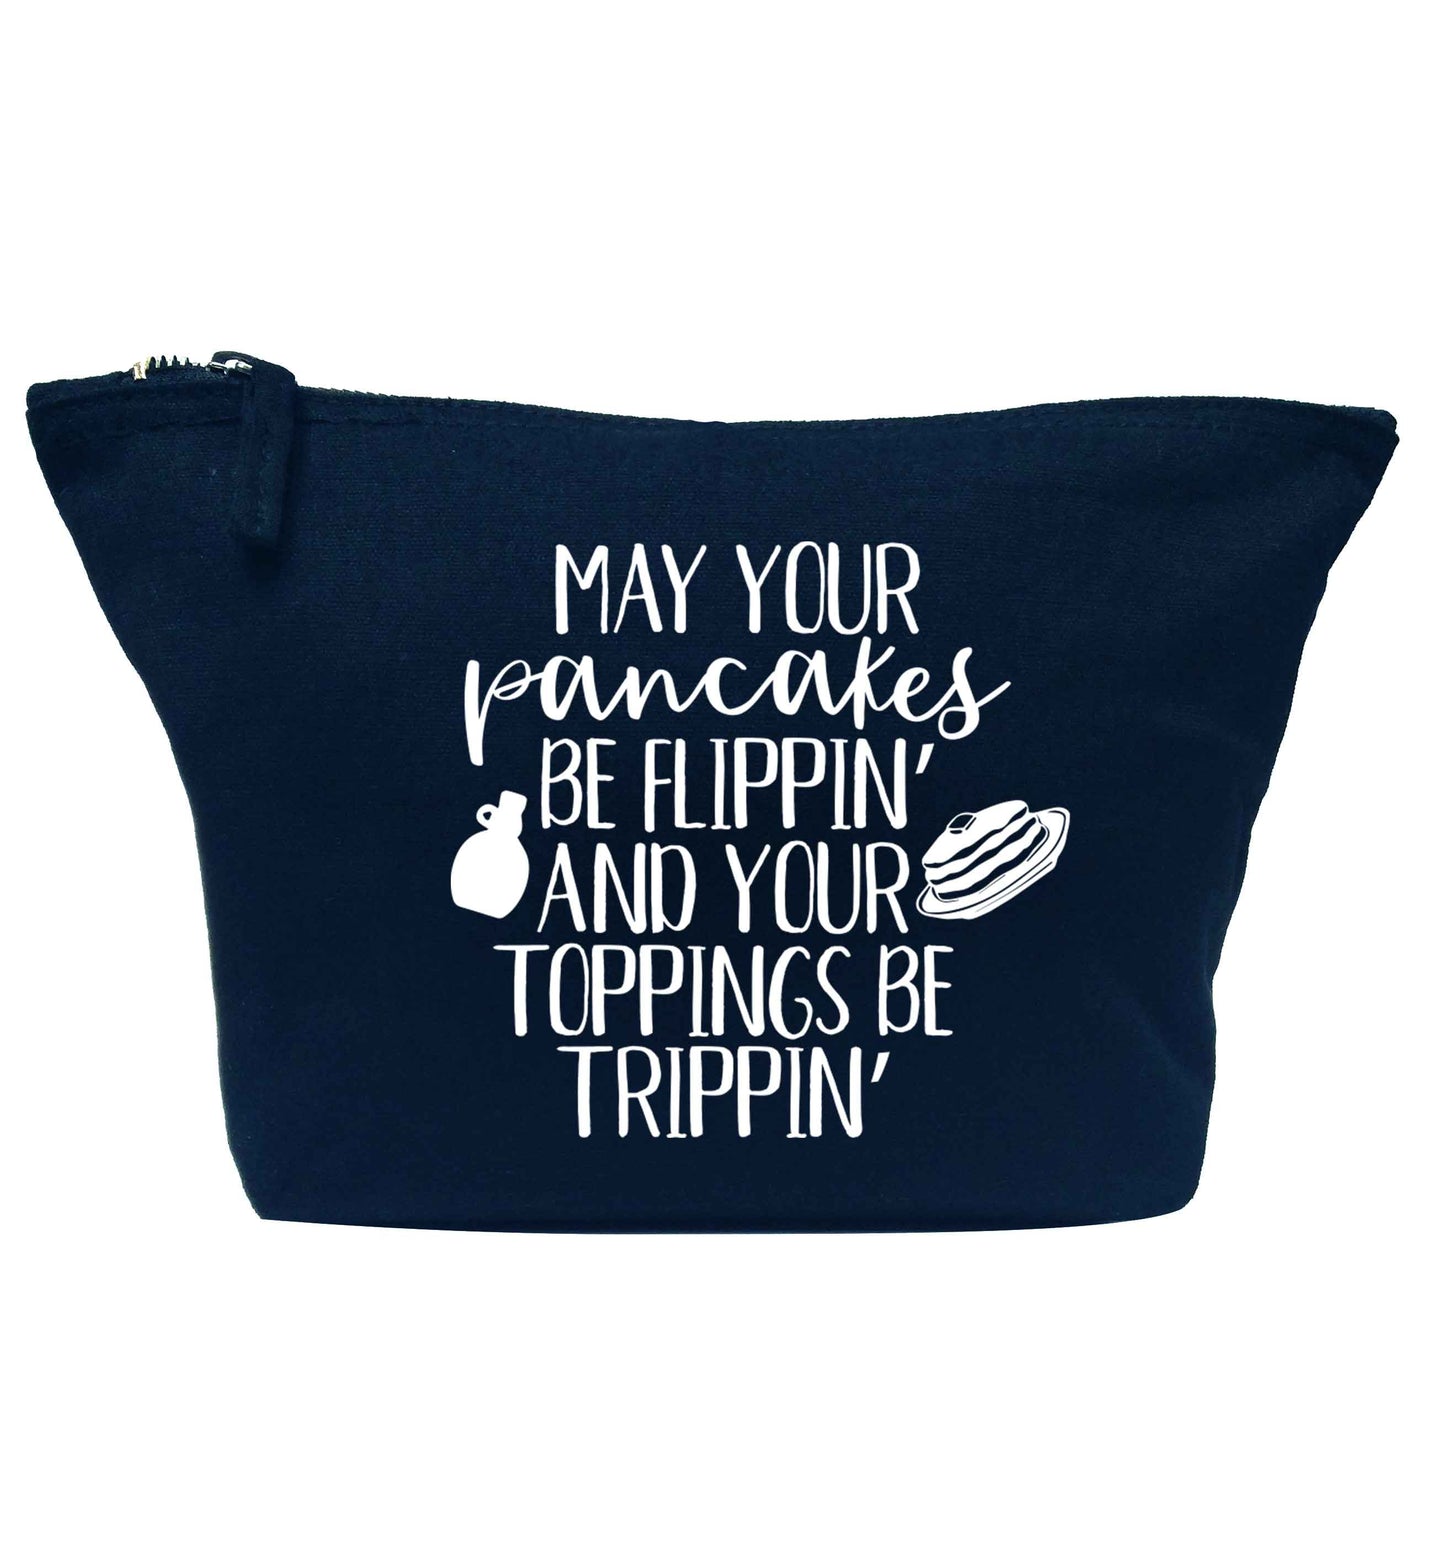 May your pancakes be flippin' and your toppings be trippin' navy makeup bag